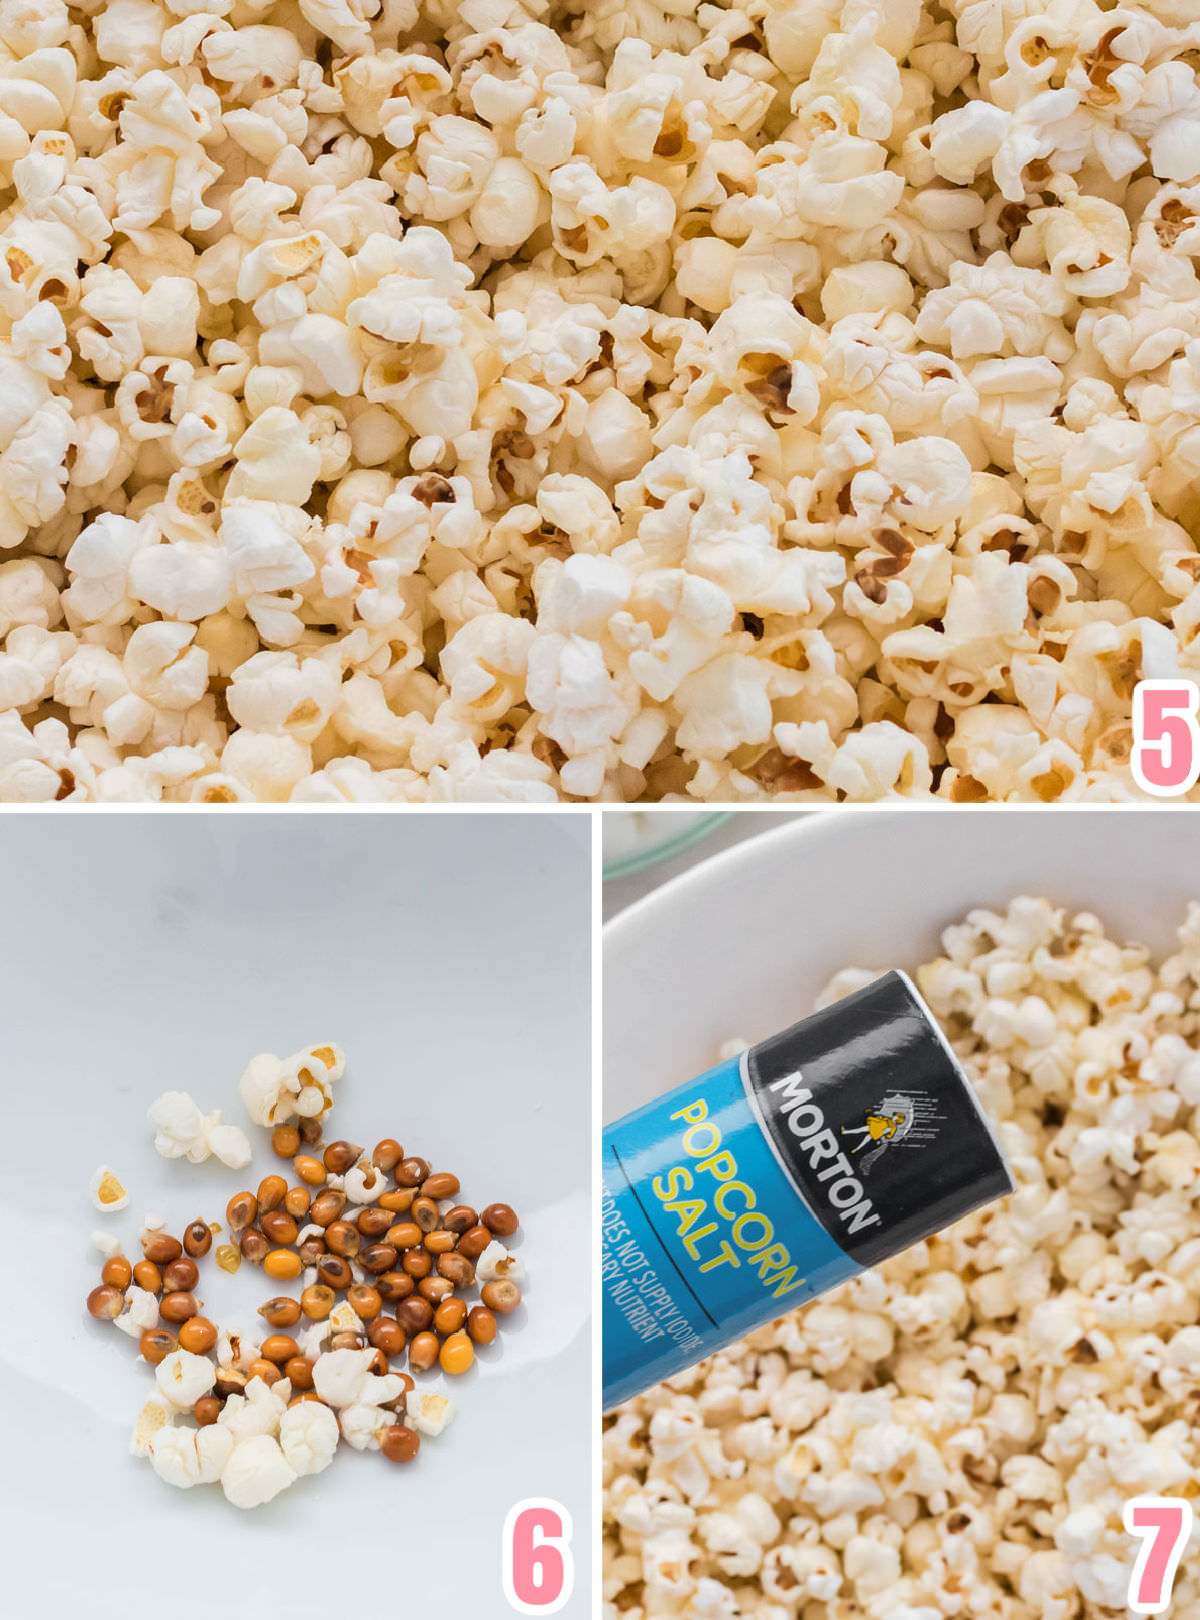 Collage image showing the steps required to make the popcorn.